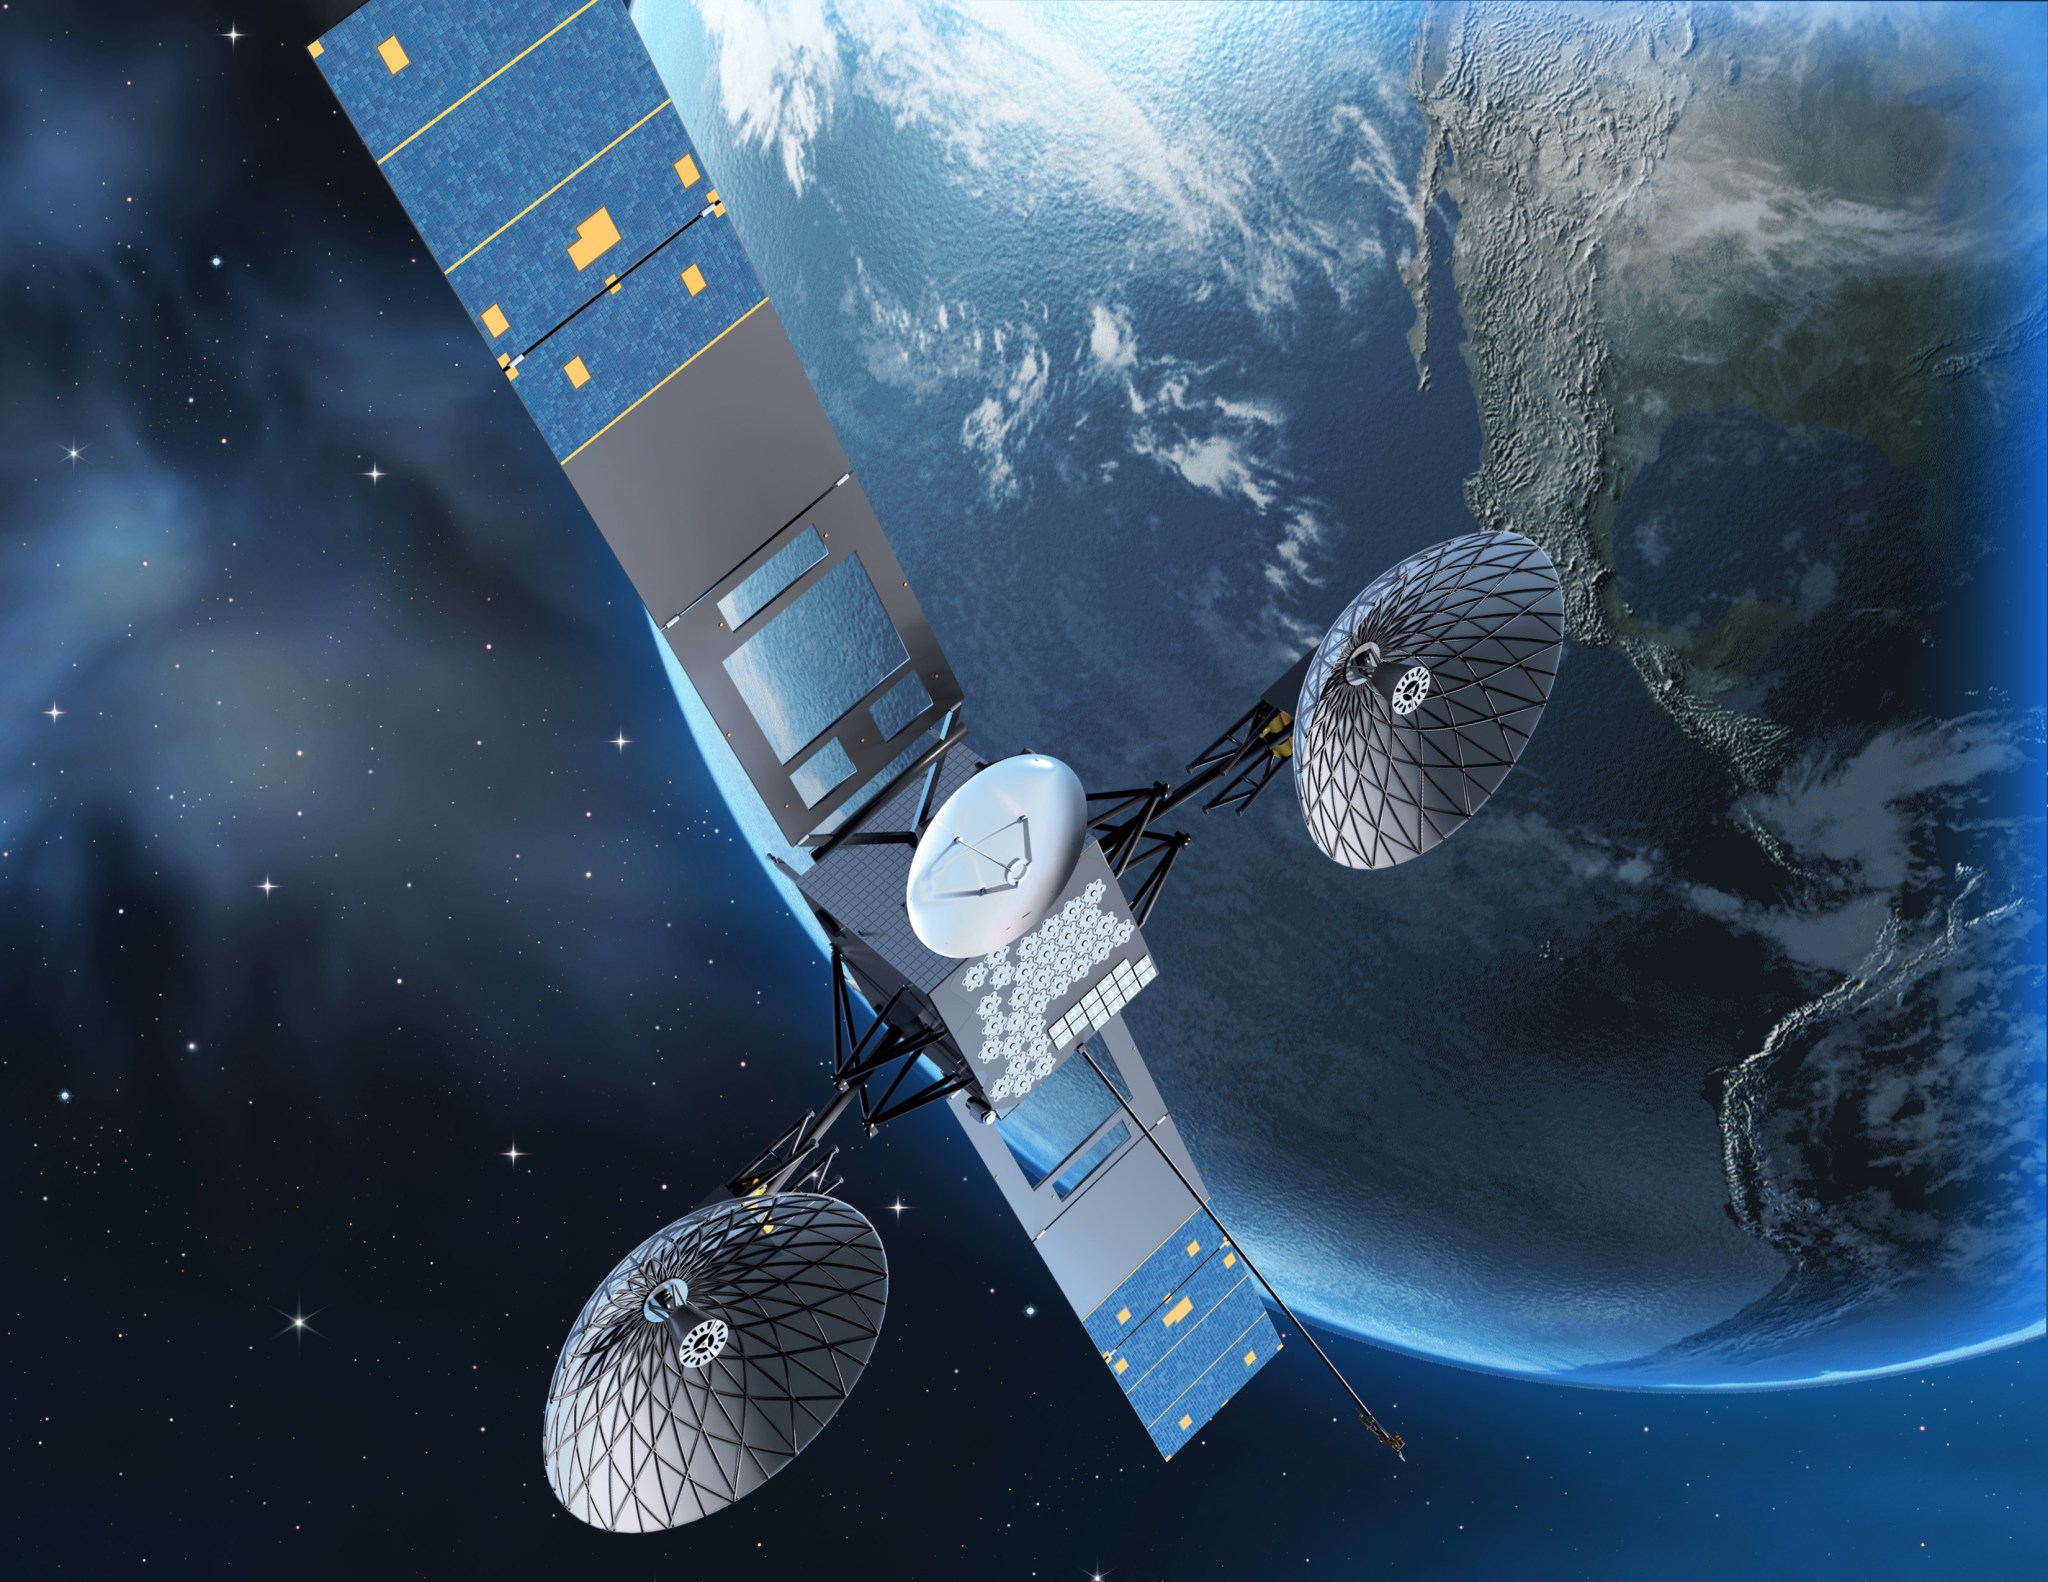 NASA is preparing to launch the next satellite in the agency’s space network fleet – the Tracking and Data Relay Satellite.